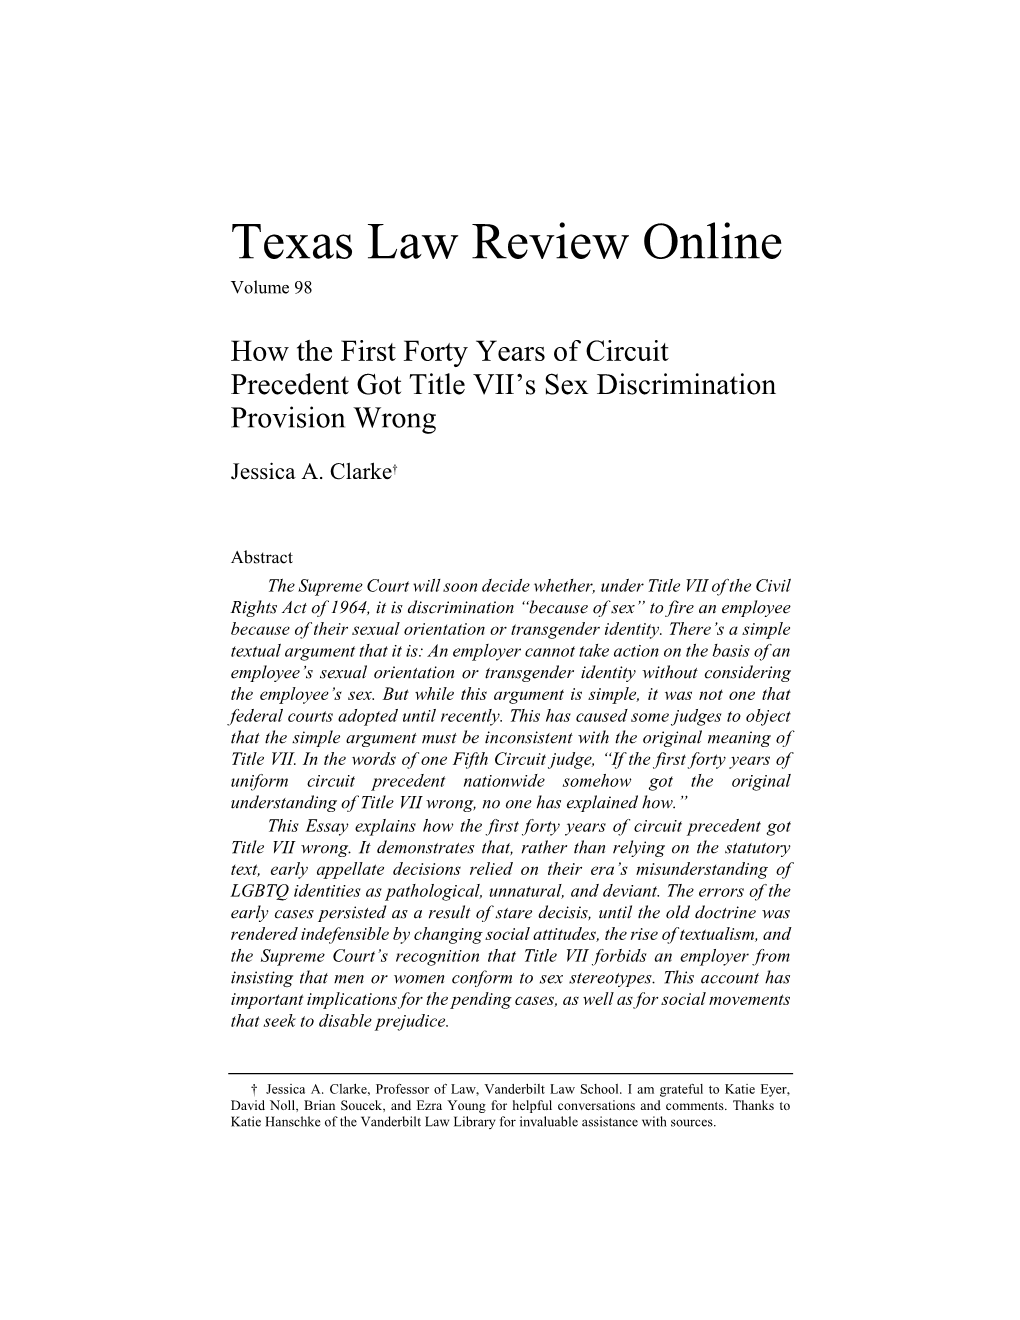 Texas Law Review Online Volume 98